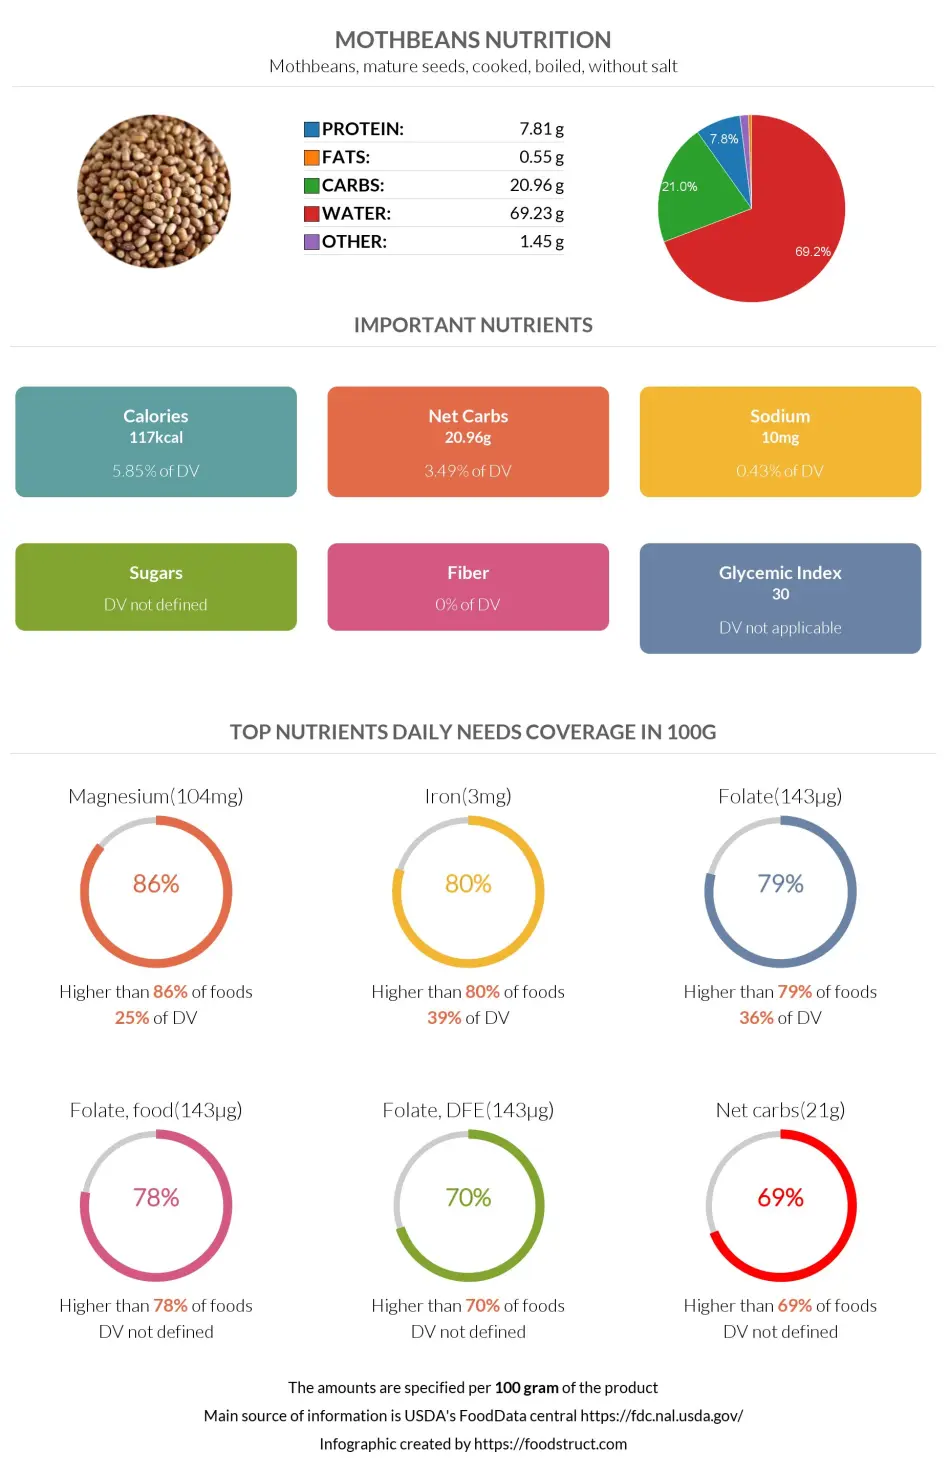 Mothbeans nutrition infographic